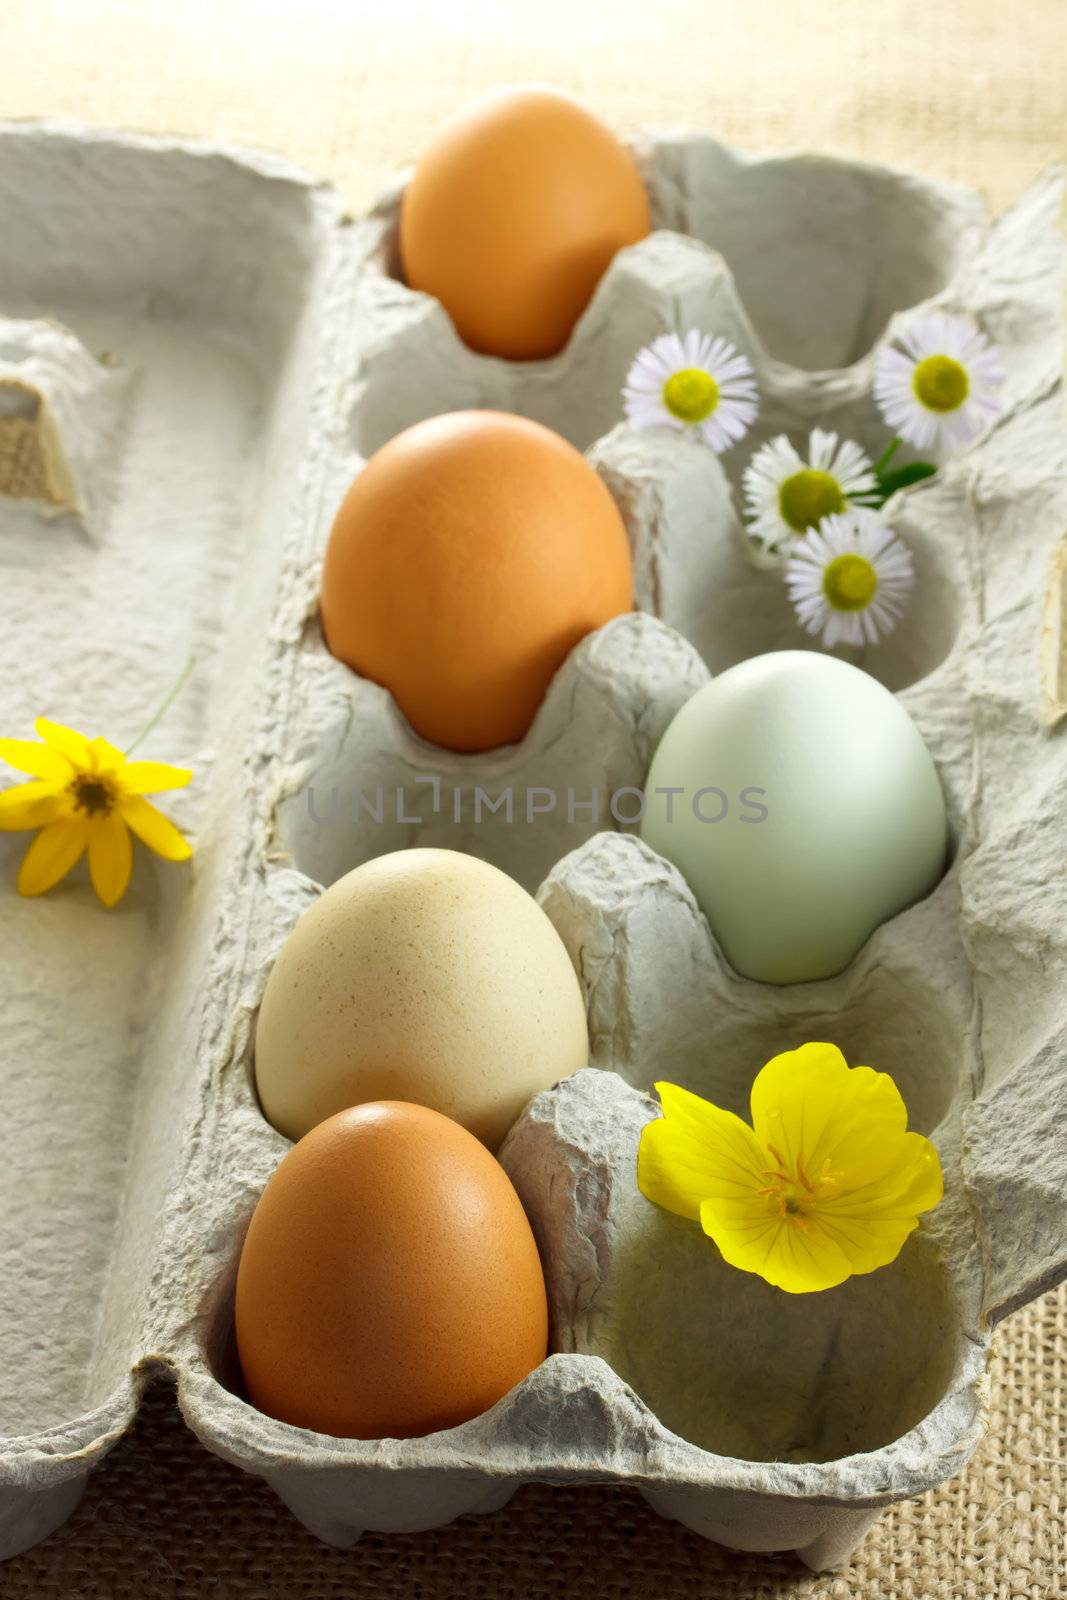 Organic colorful eggs with small flowers